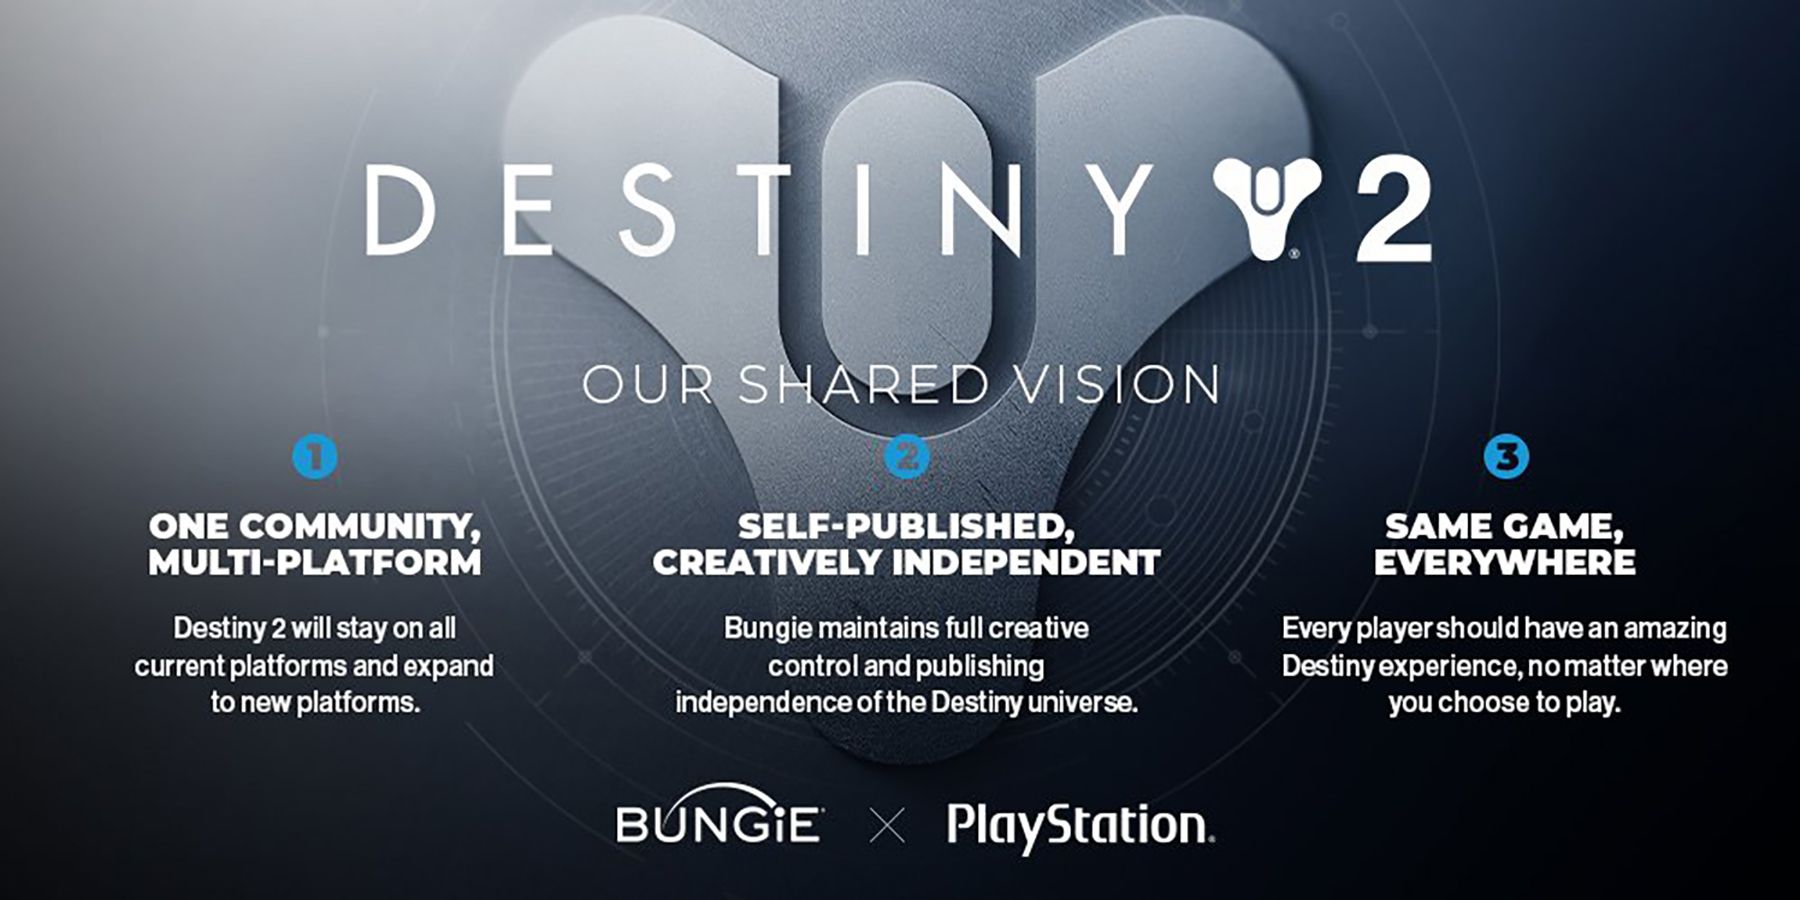 destiny-2-bungie-sony-acquisition-playstation-shared-vision-multiplatform